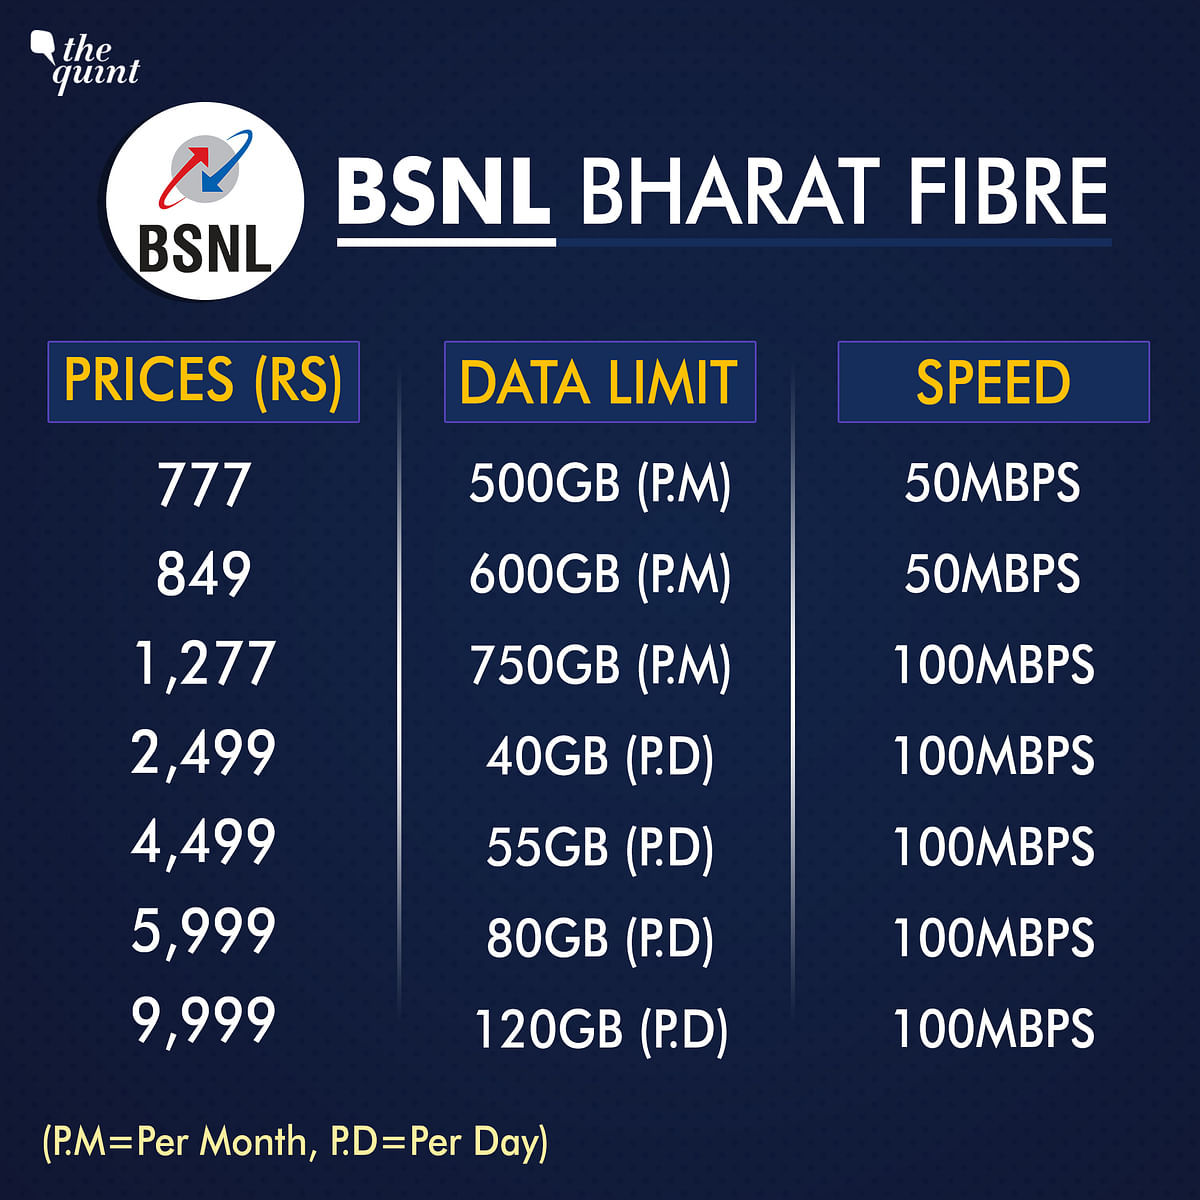 The broadband plans available for consumers offer high speed internet, more data usage and special benefits as well.